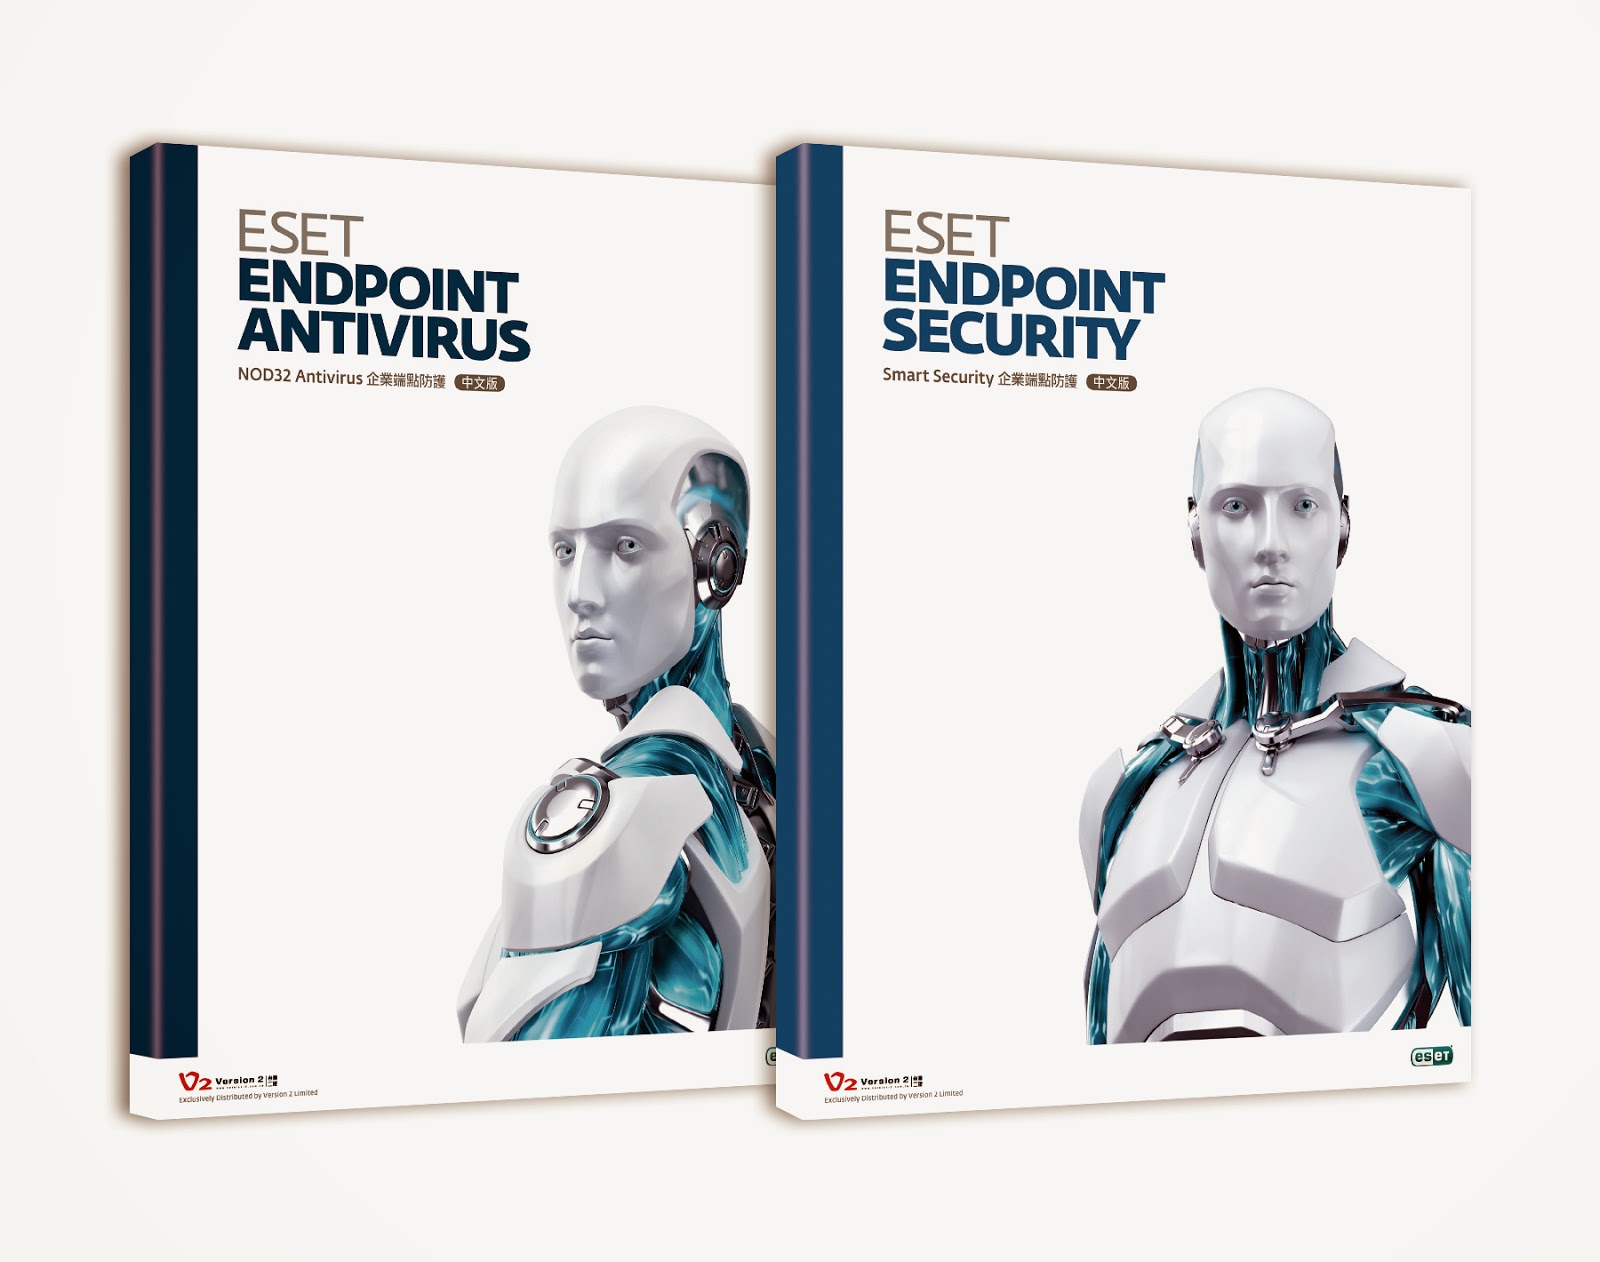 eset endpoint security 8 download